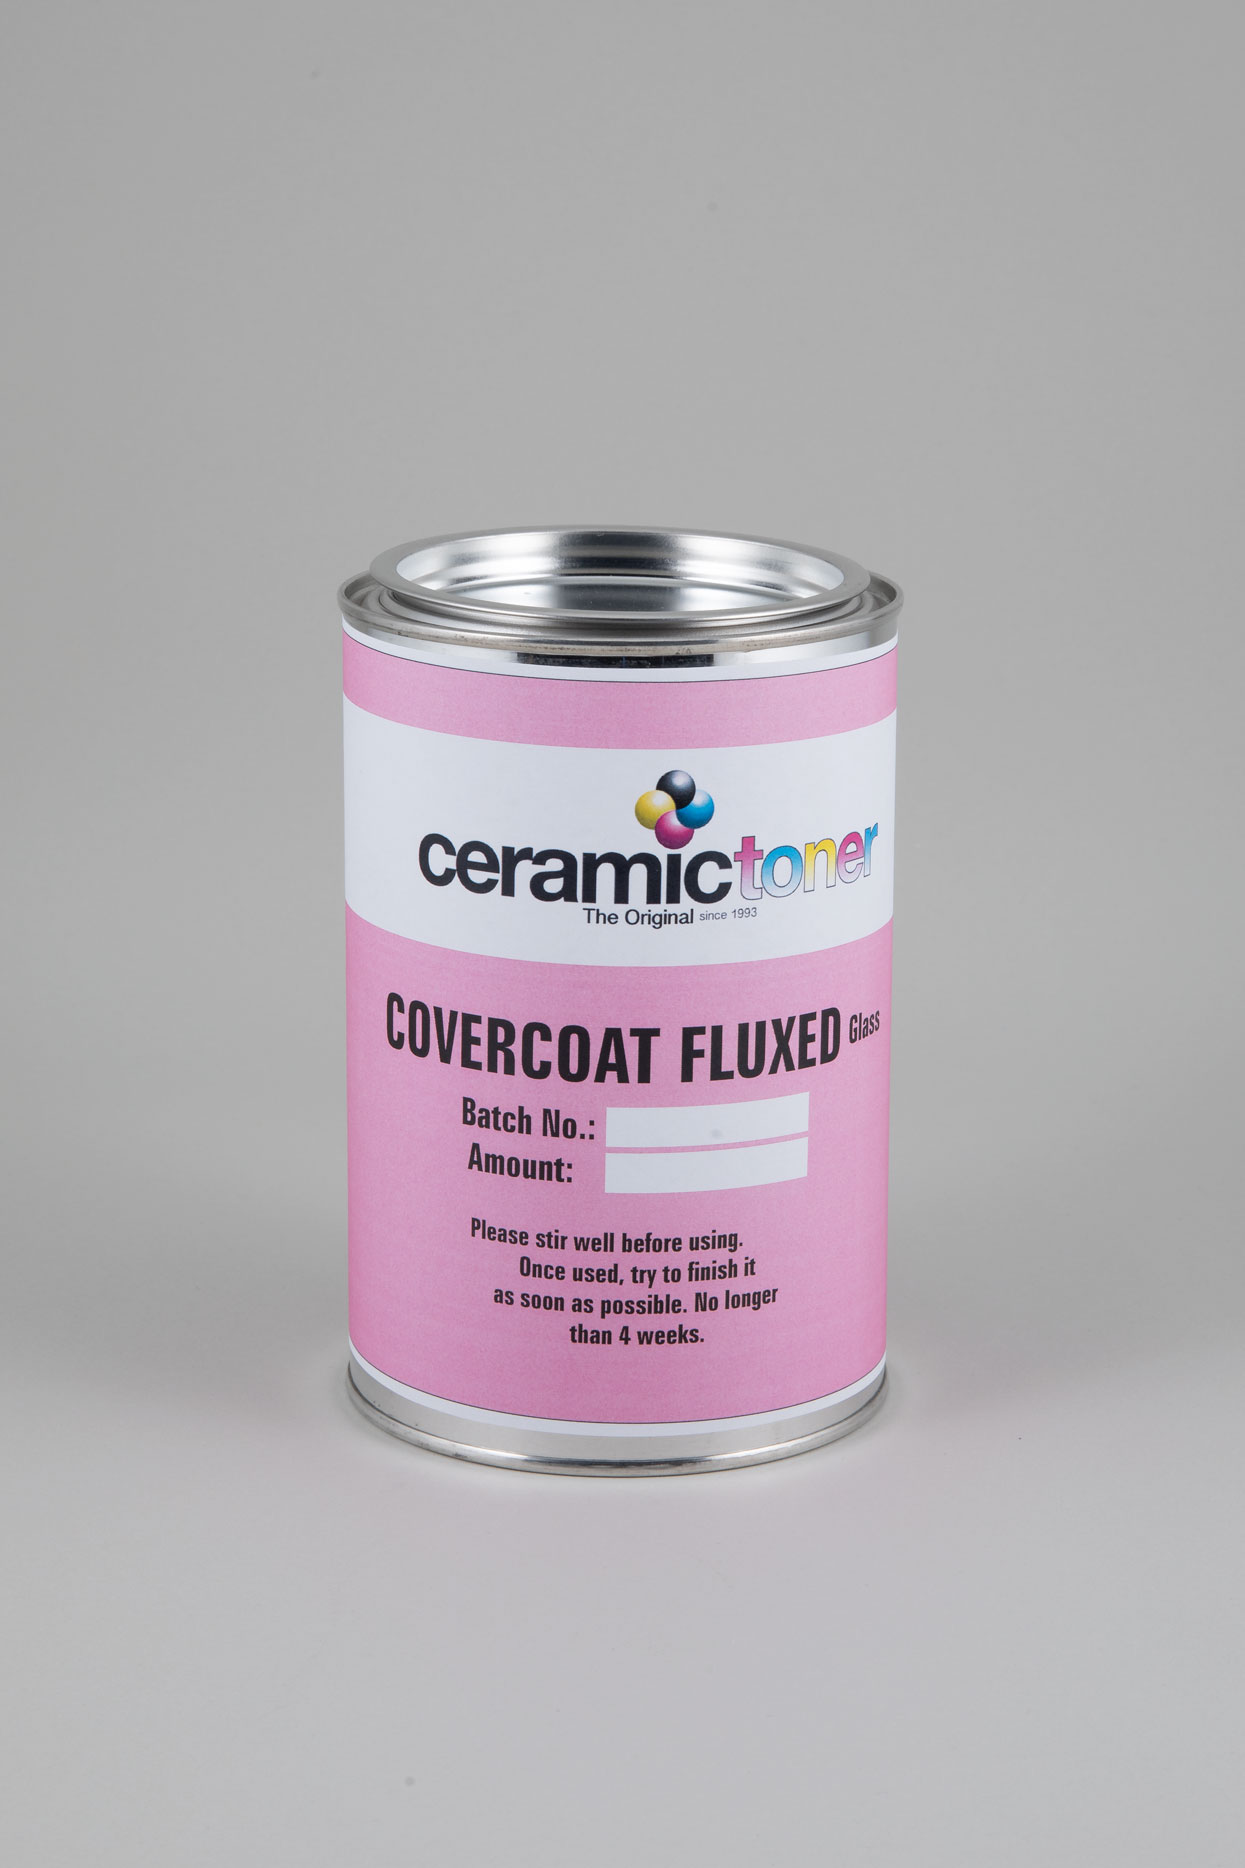 Ceramictoner Covercoat Fluxed Glass is a coating with glass flow. The coating comes in a can and is suitable for application on glass. The coating is magenta in colour.